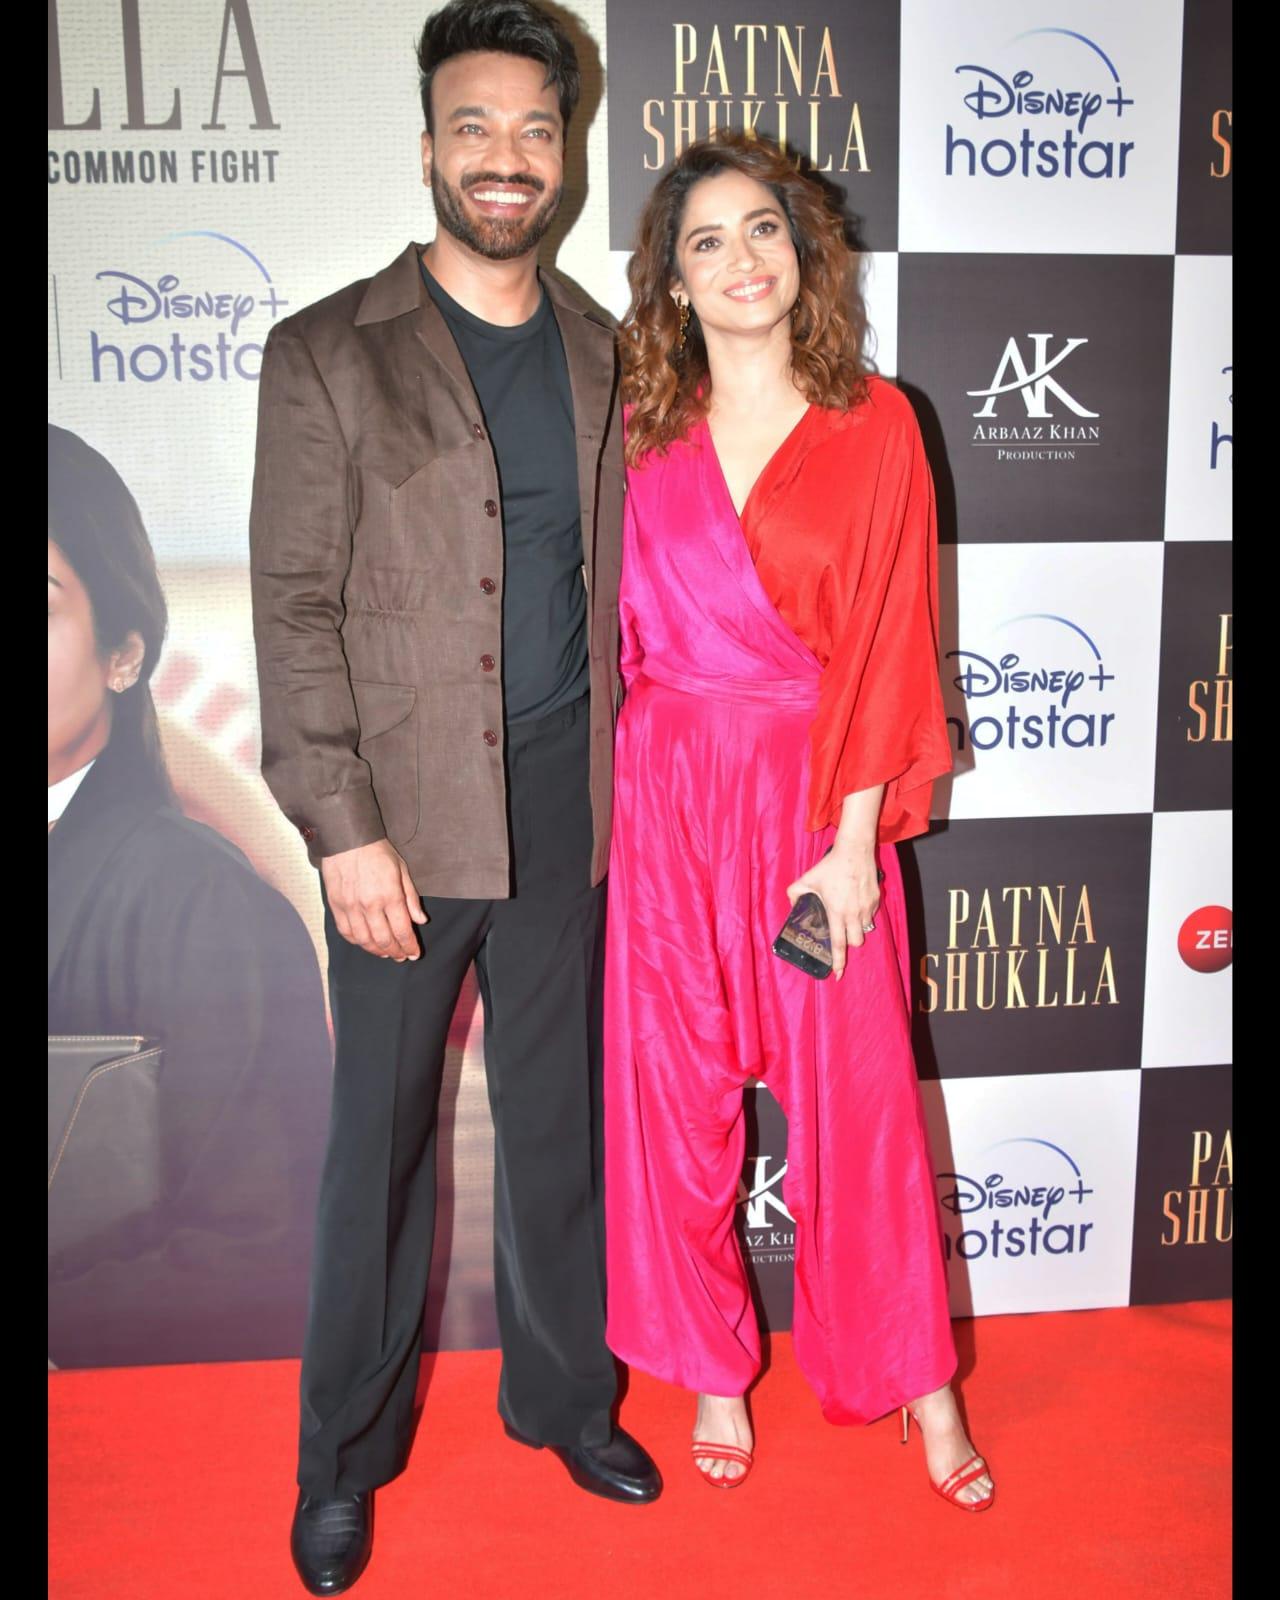 Power Couple Ankita Lokhande and Vicky Jain also attended the star-studded screening